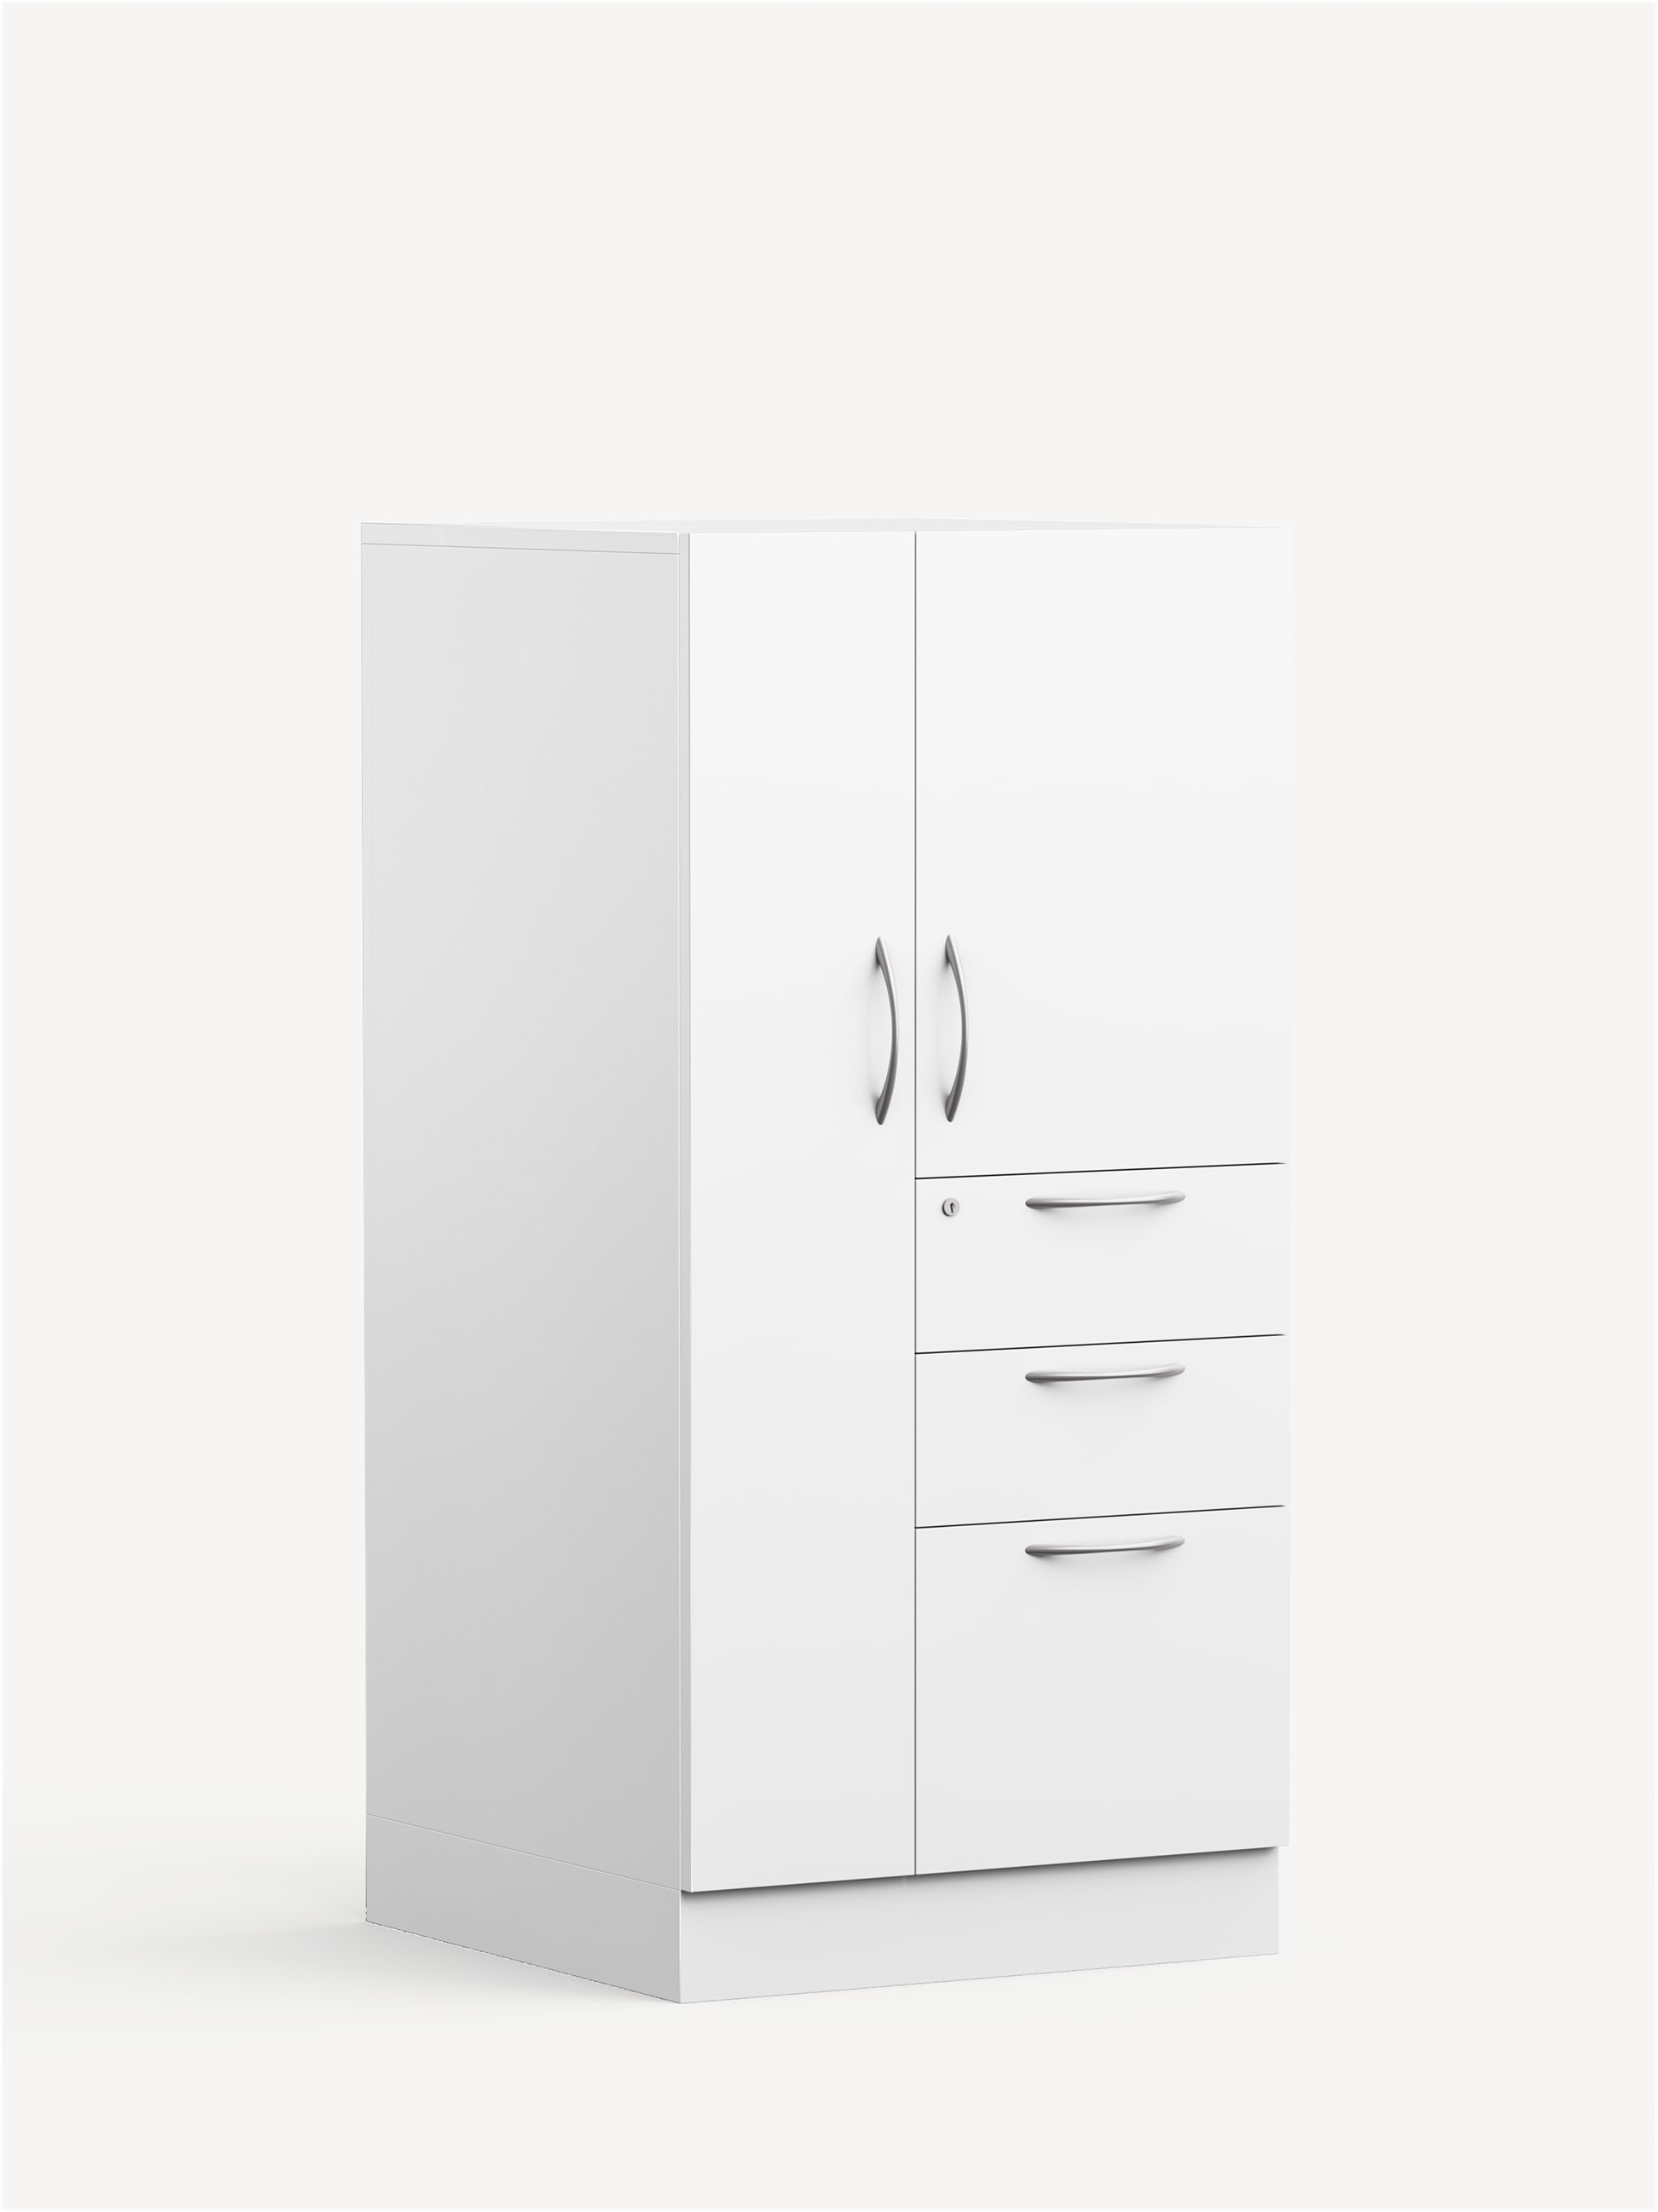 Align Storage Tower in white with a wardrobe on the left and a door, two box drawers and one file drawer on the right.